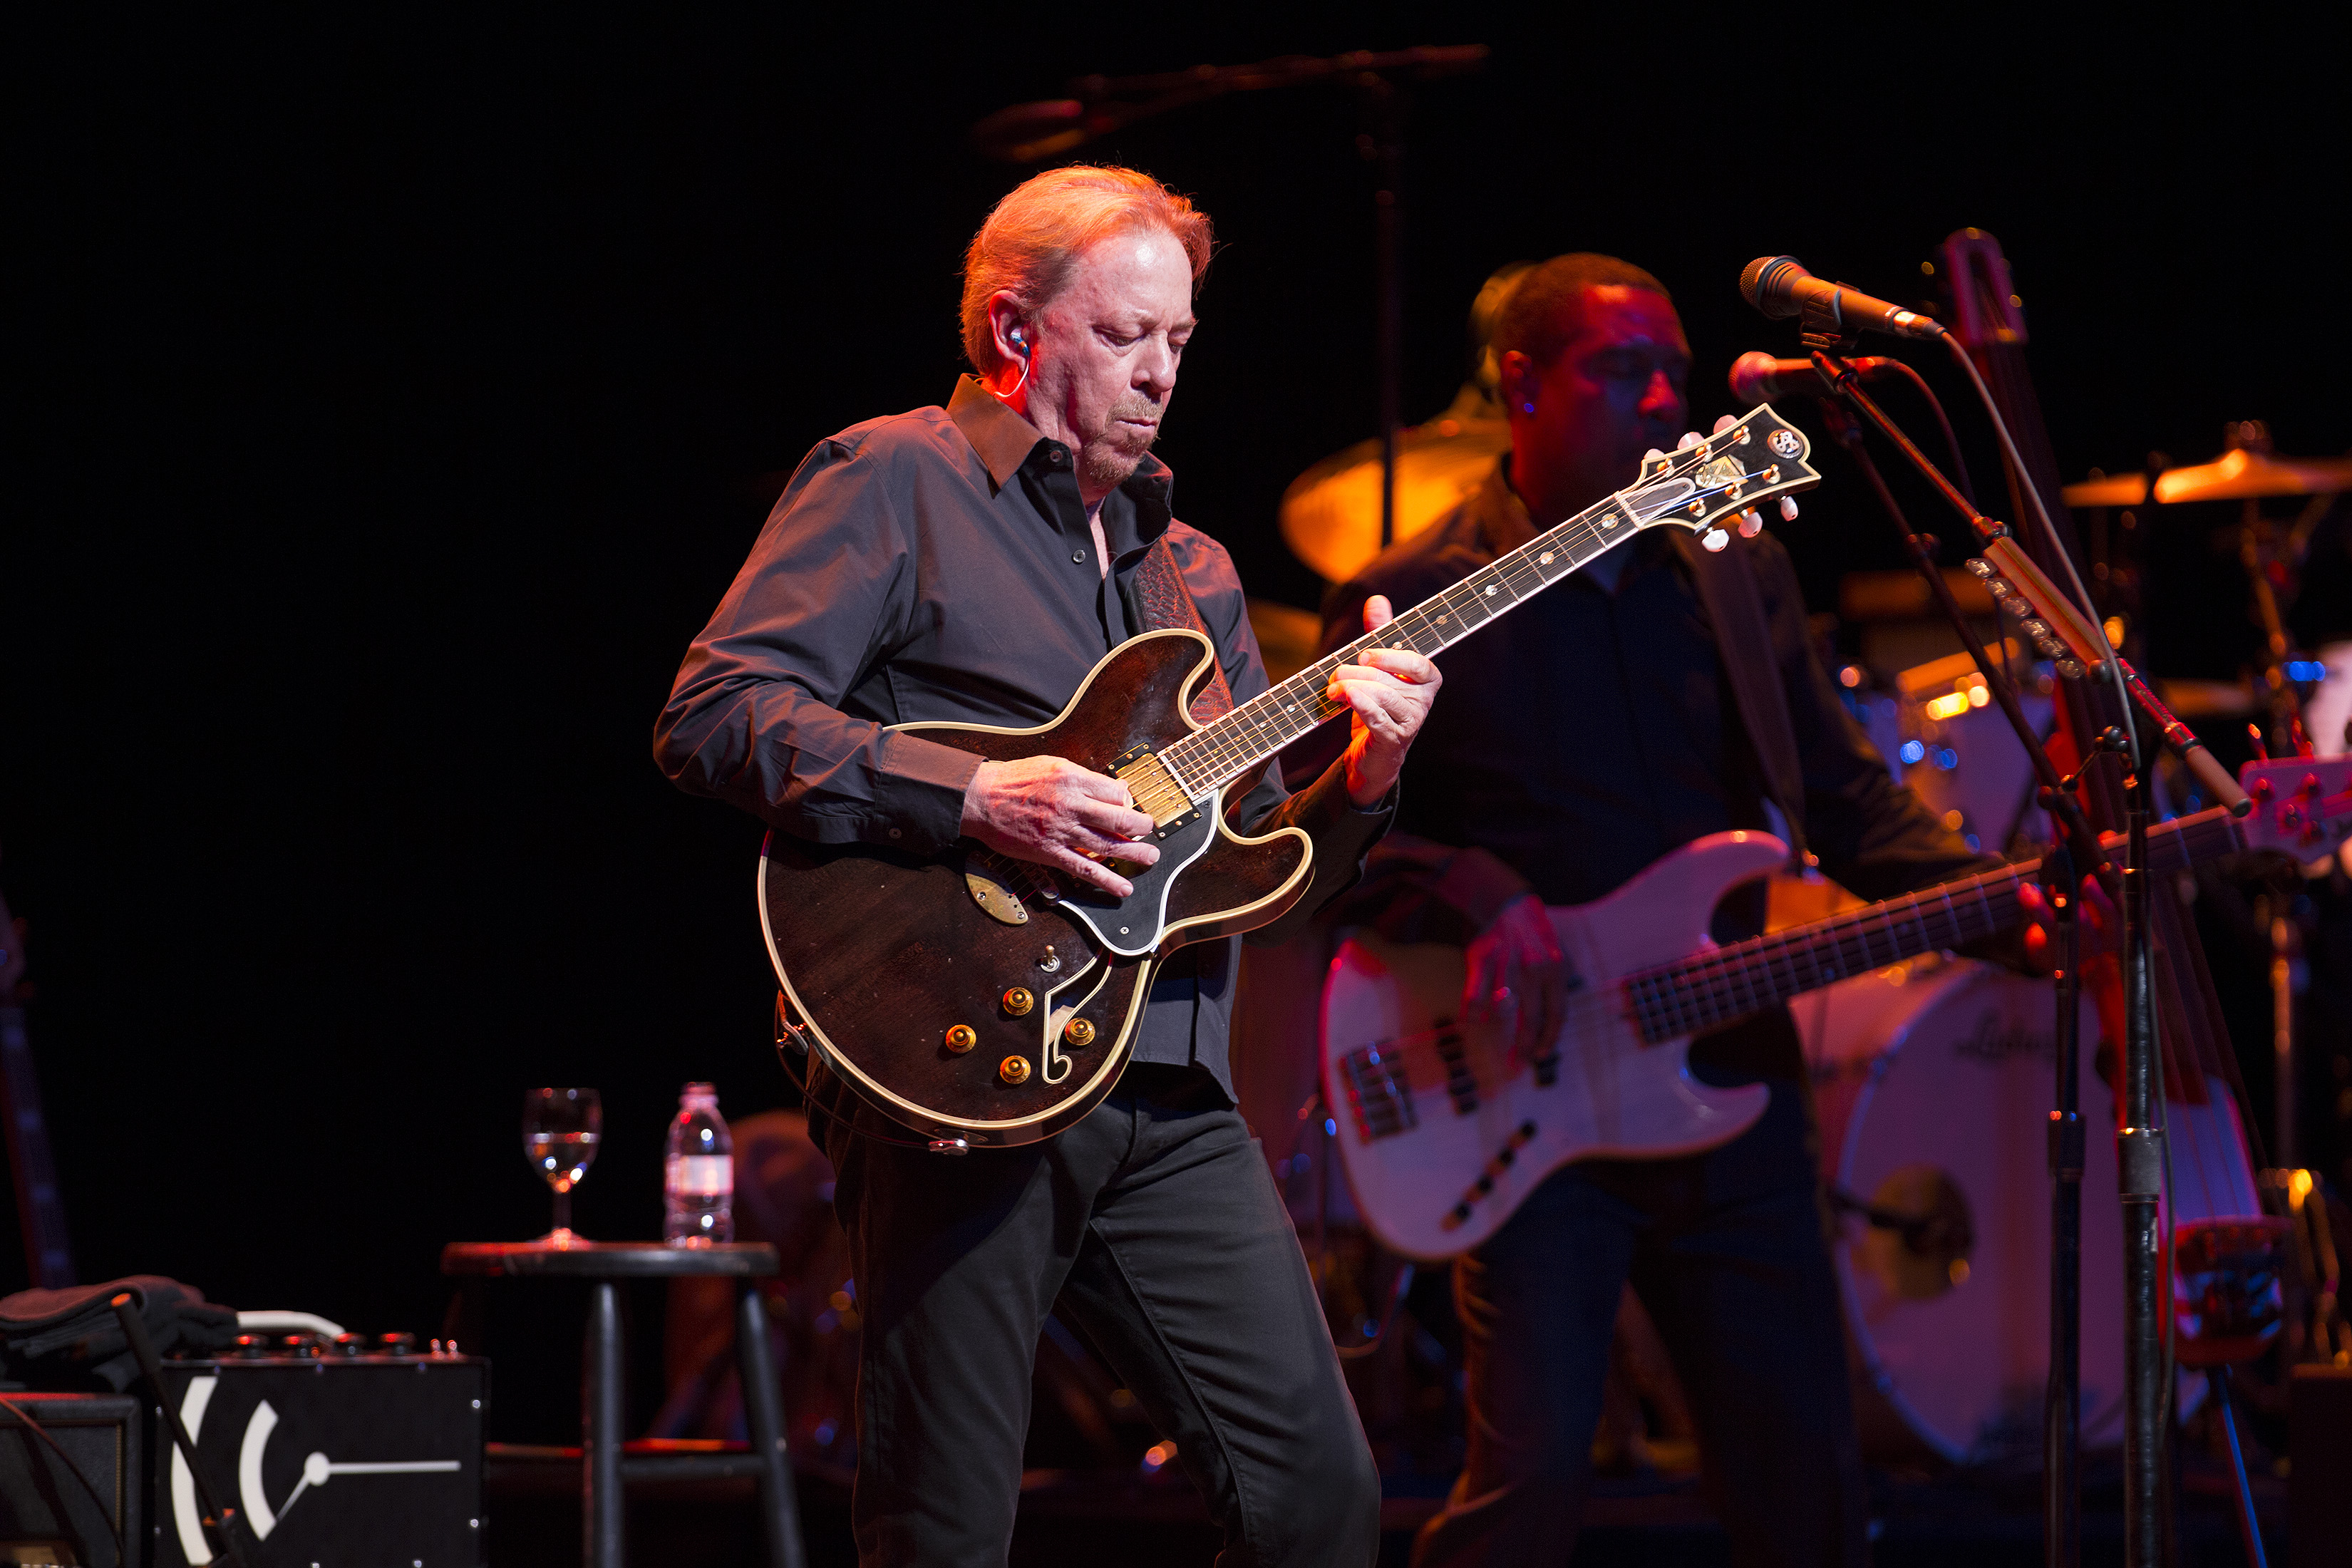 Boz Scaggs tour 2022 How to buy tickets, schedule, festival appearance